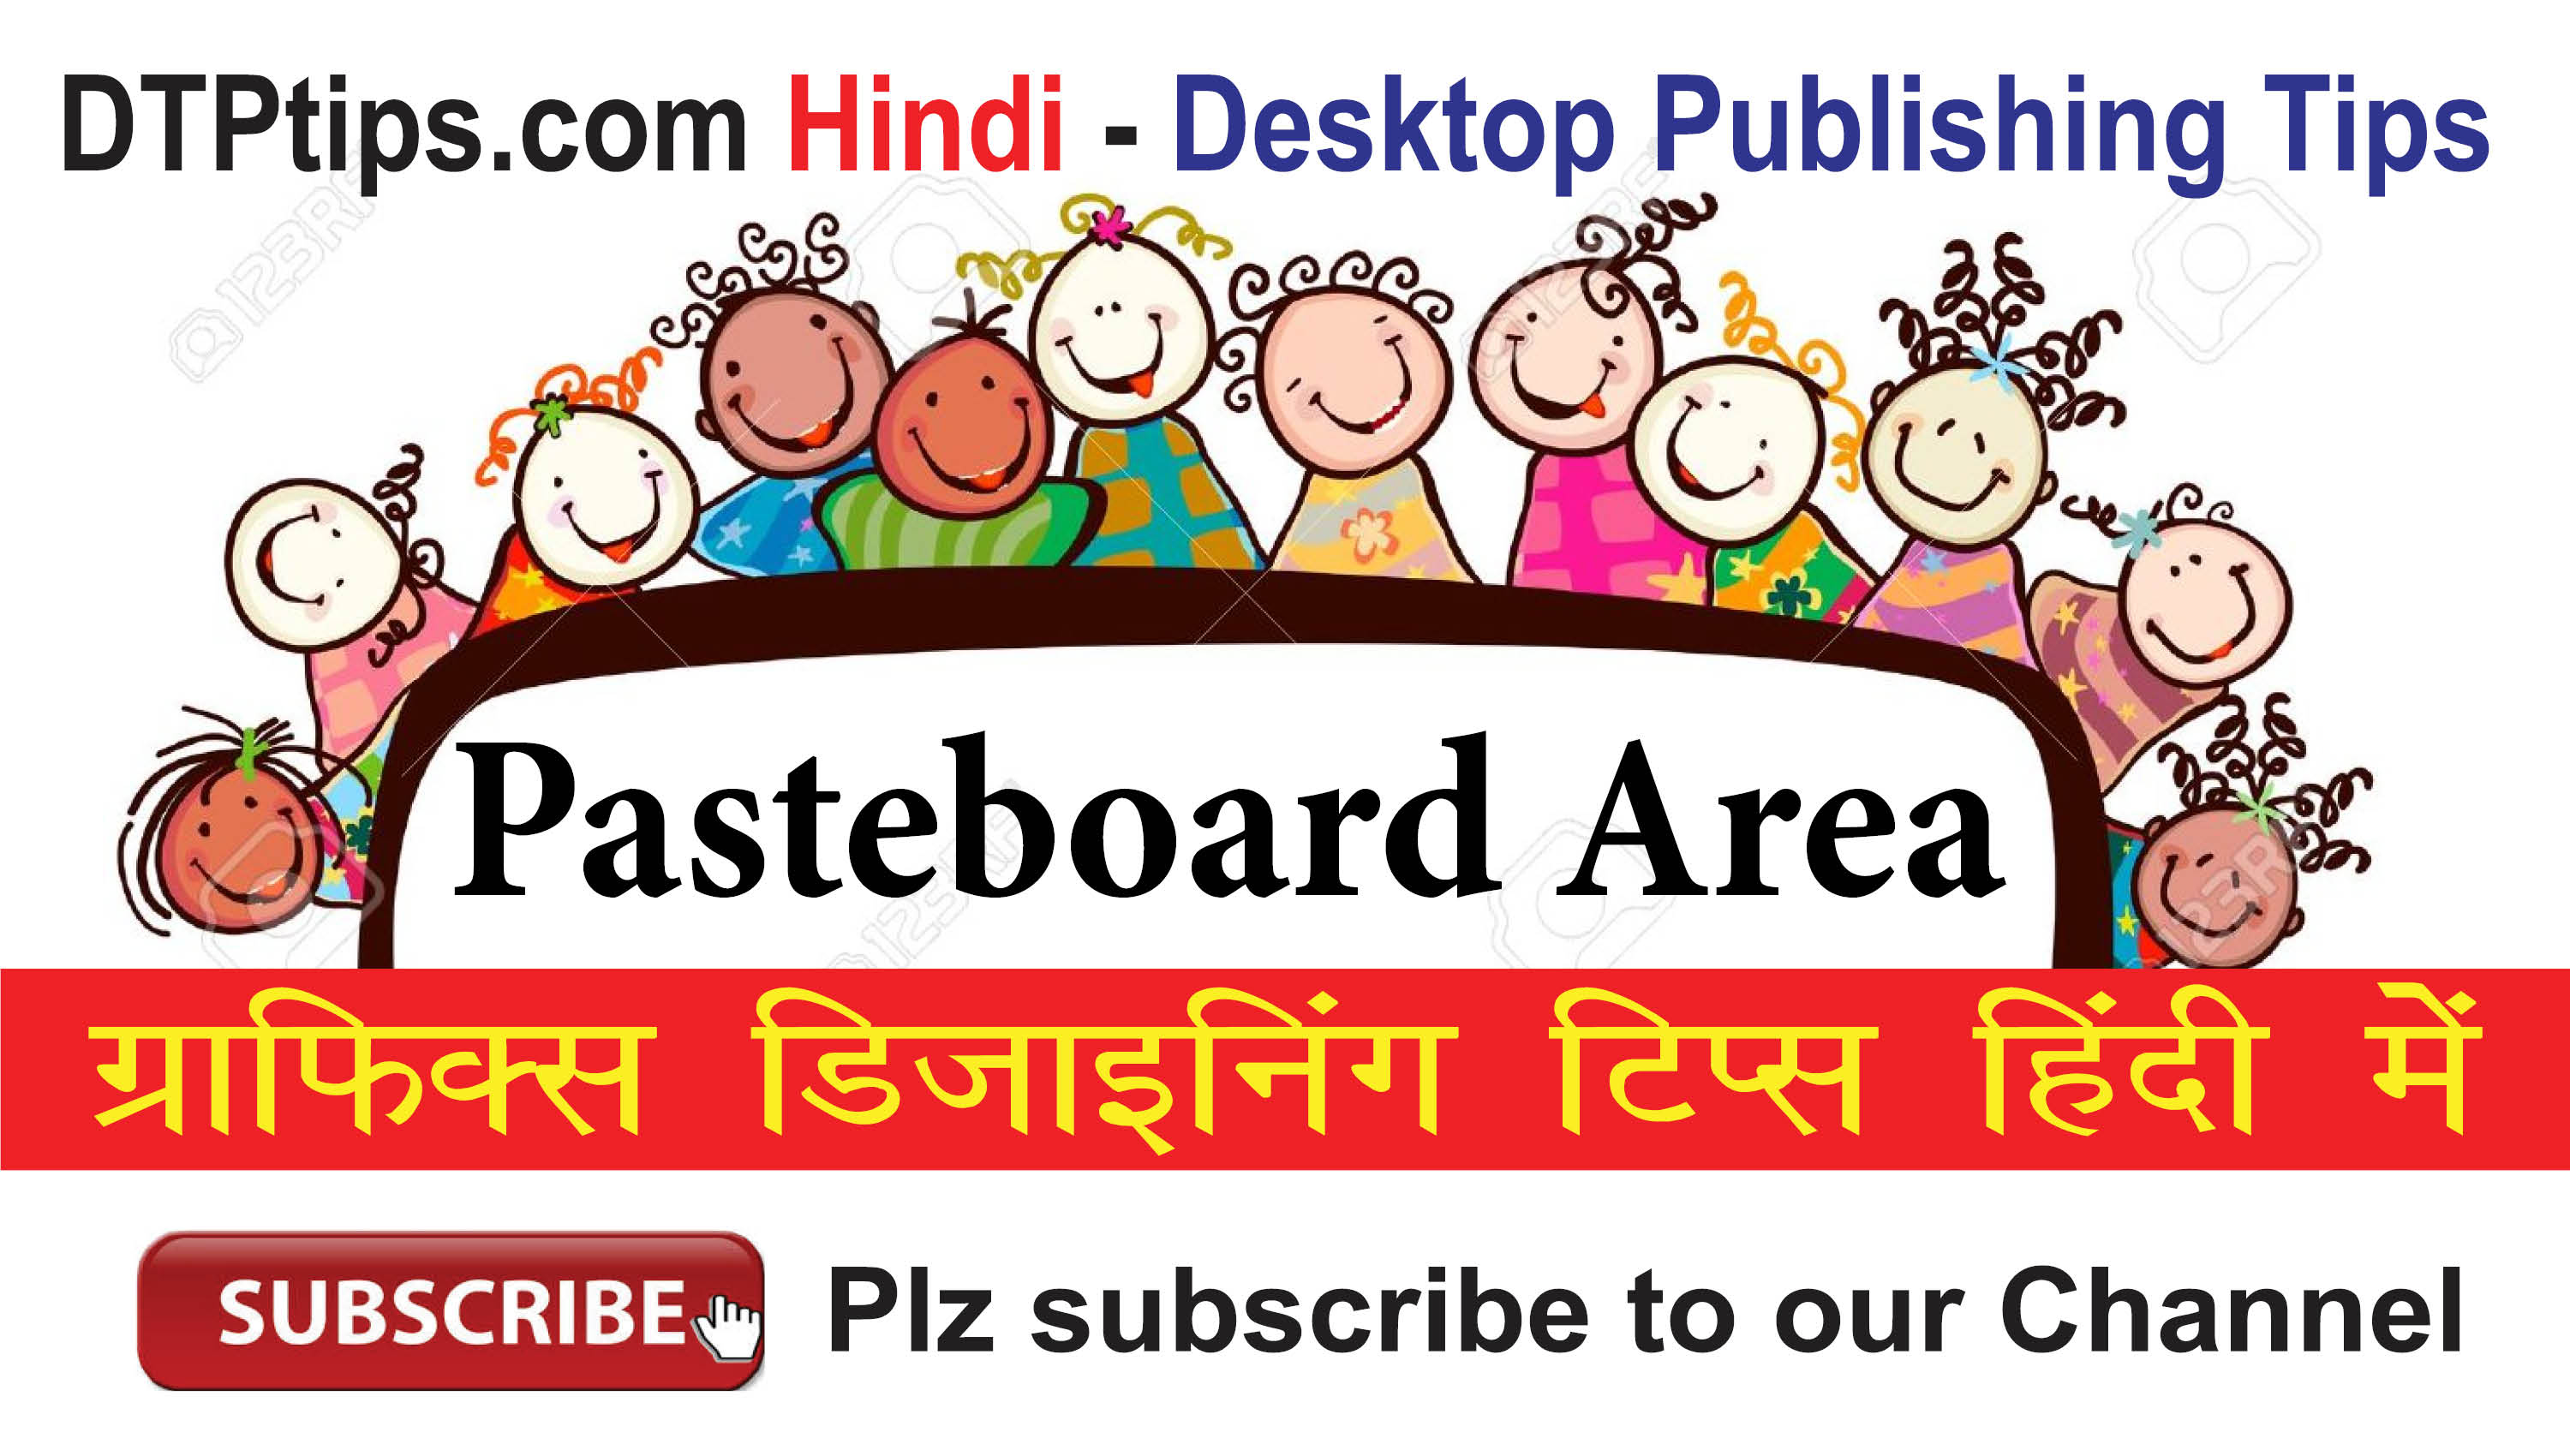 How to increase Paste Board Area in Indesign – Learn Indesign in Hindi